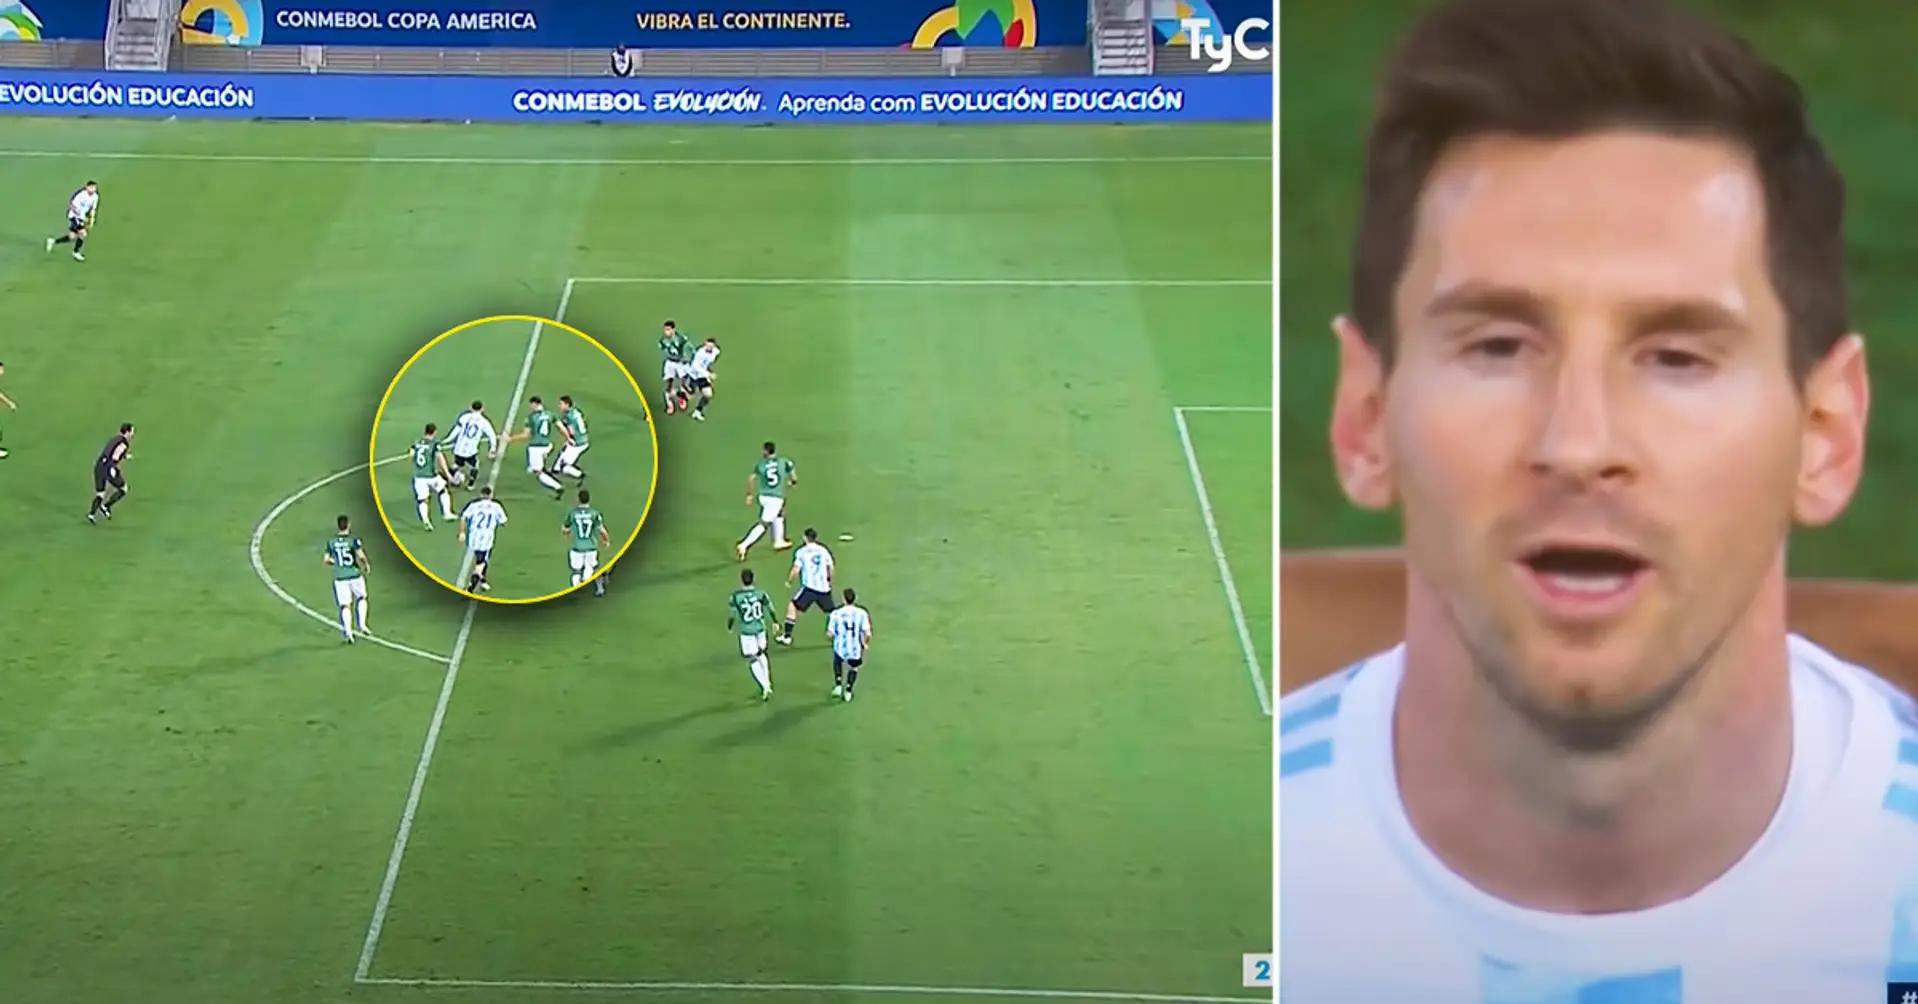 Leo Messi pulls off incredible assist despite being surrounded by 3 Bolivia defenders